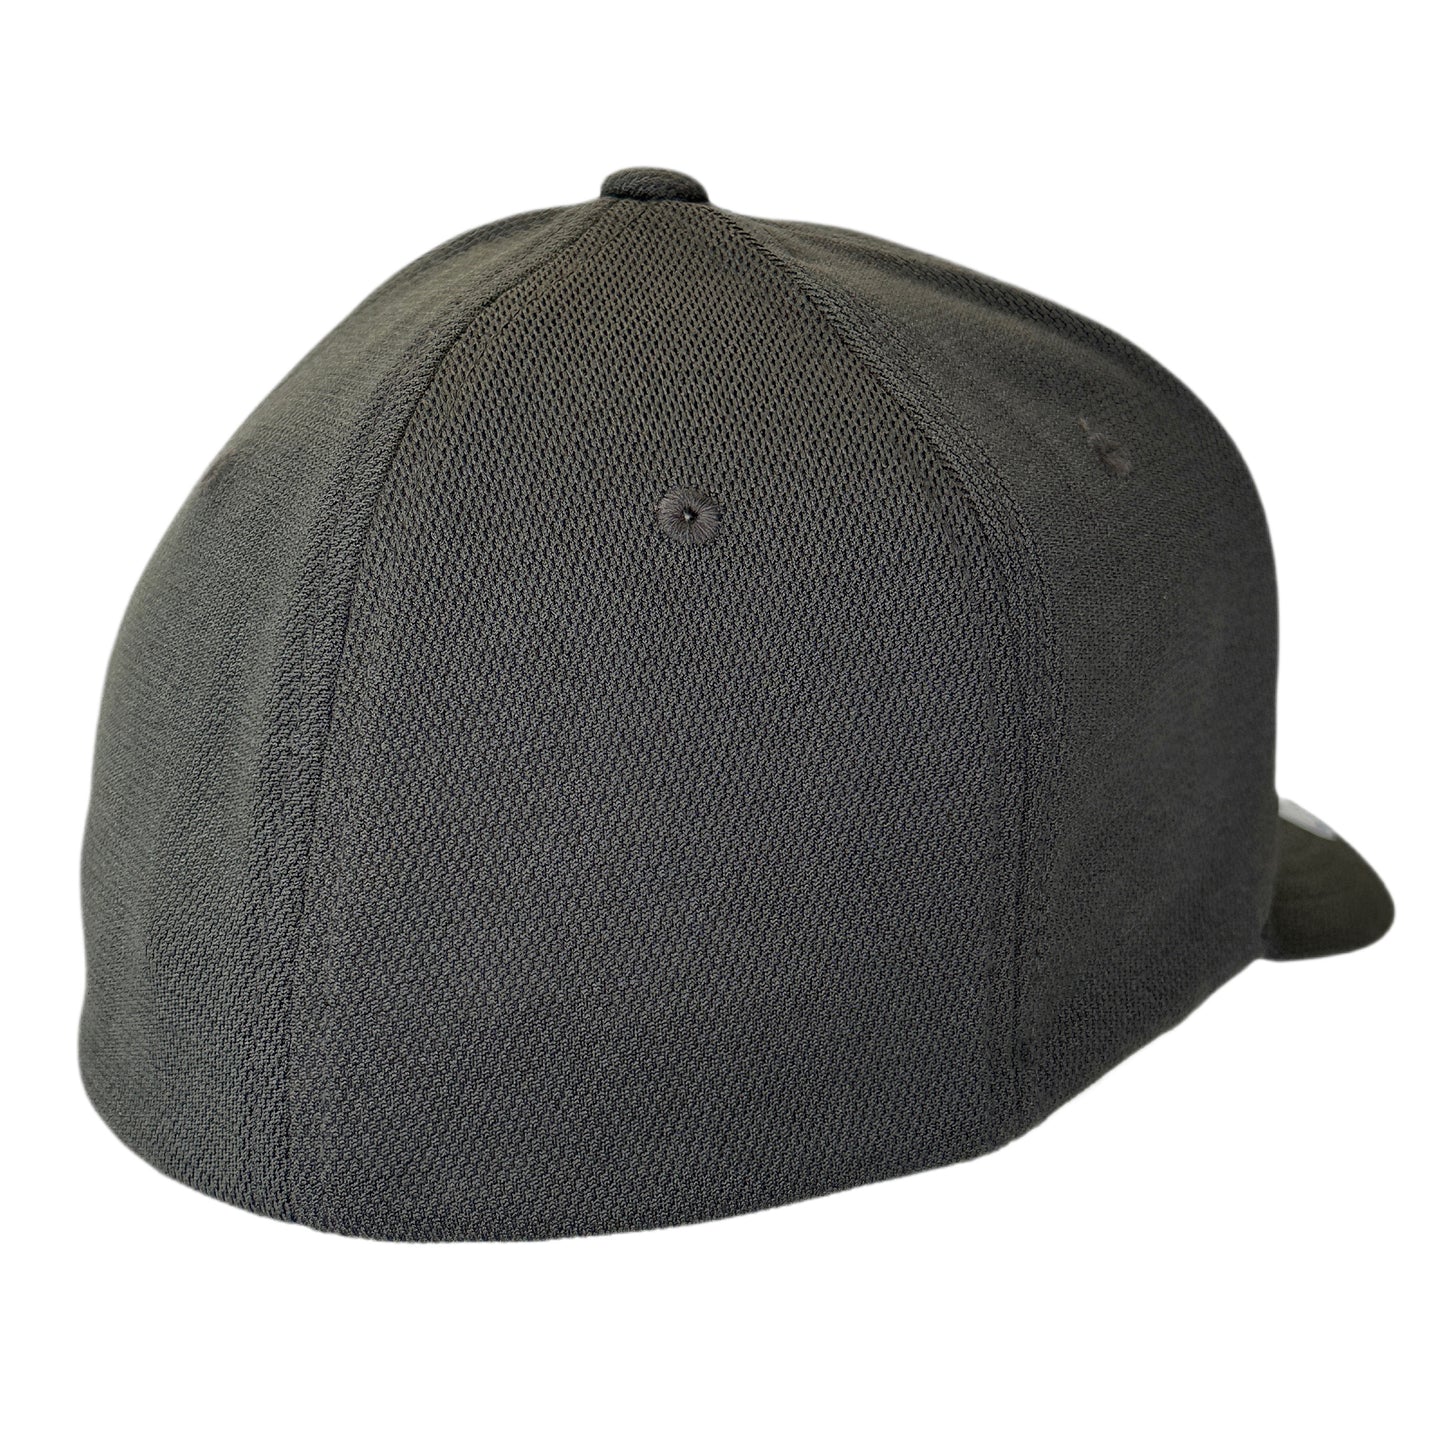 LIMITED EDITION SEPTEMBER! Flexfit "Never Fade" Vermin Charcoal Hat